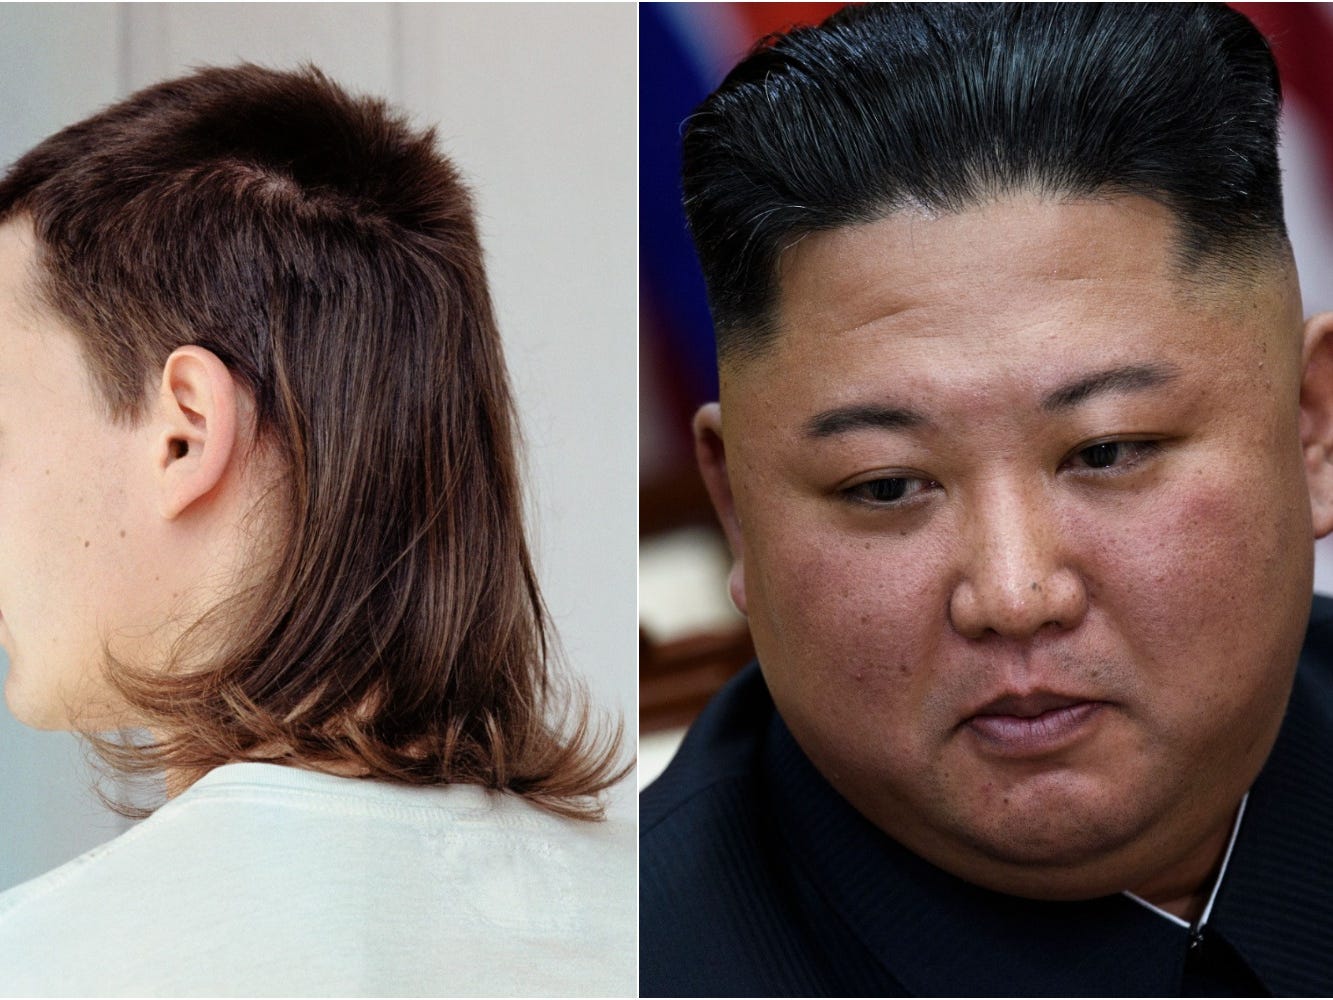 A picture of a mullet and North Korea's Kim Jong Un